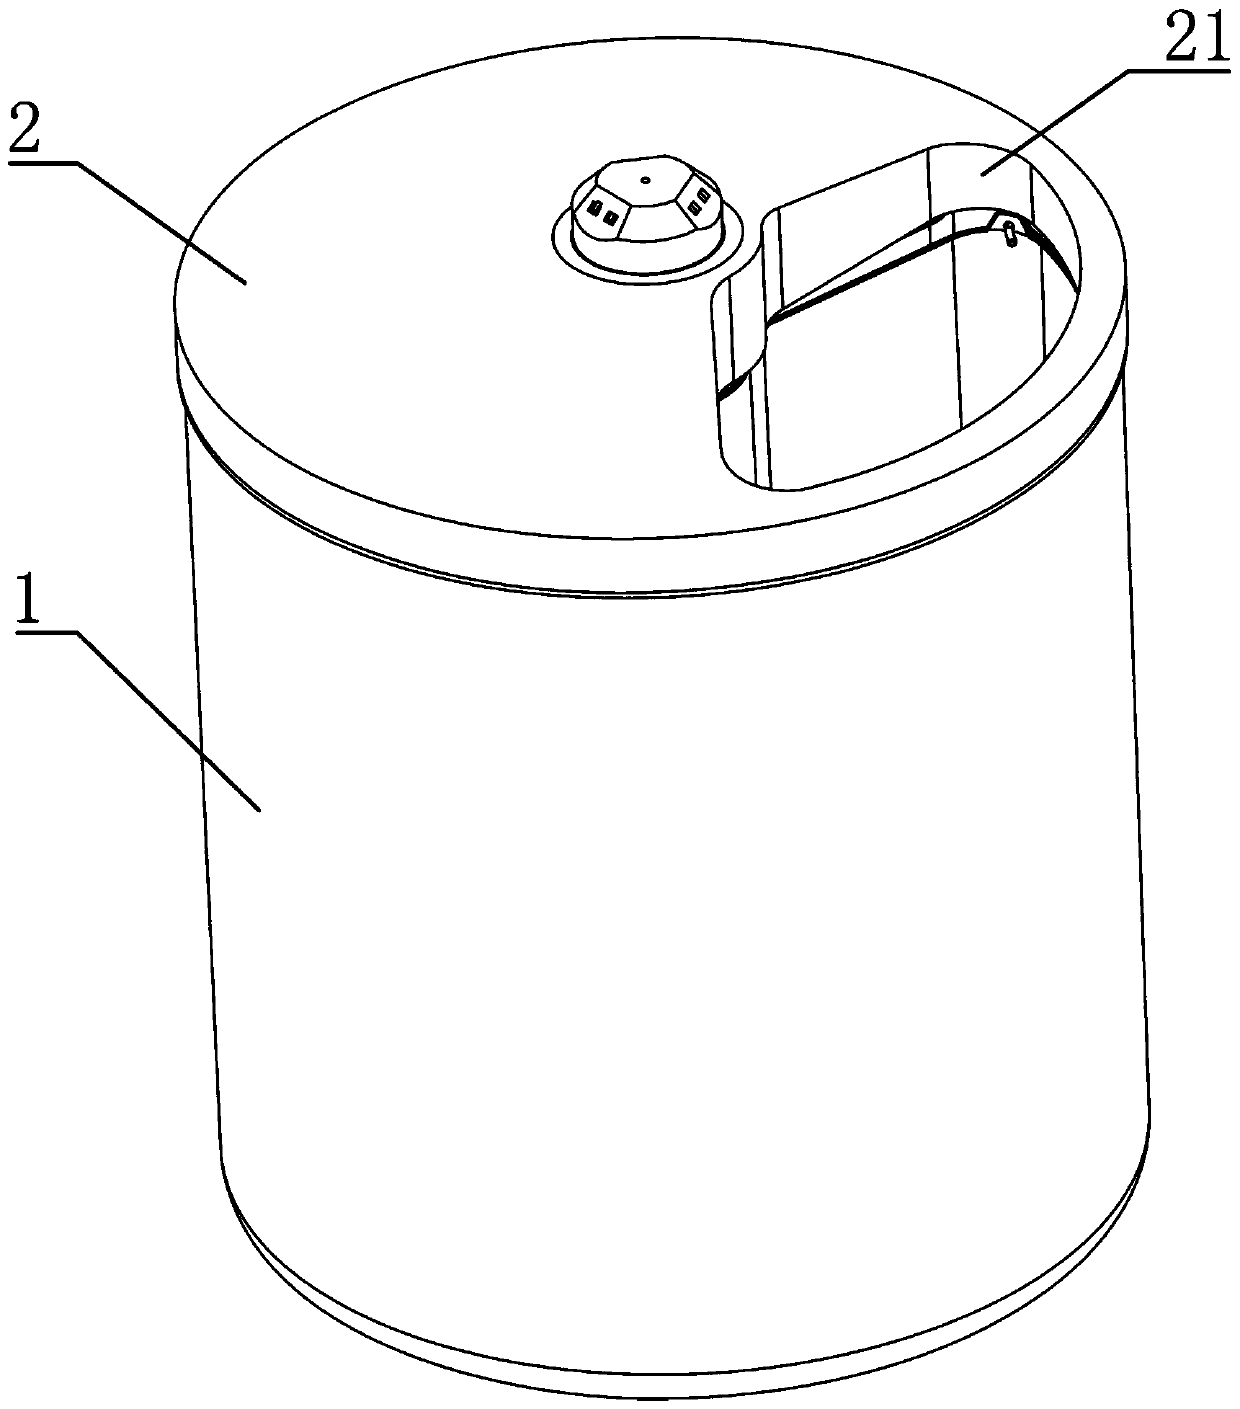 Intelligent classification garbage can and intelligent garbage classification system